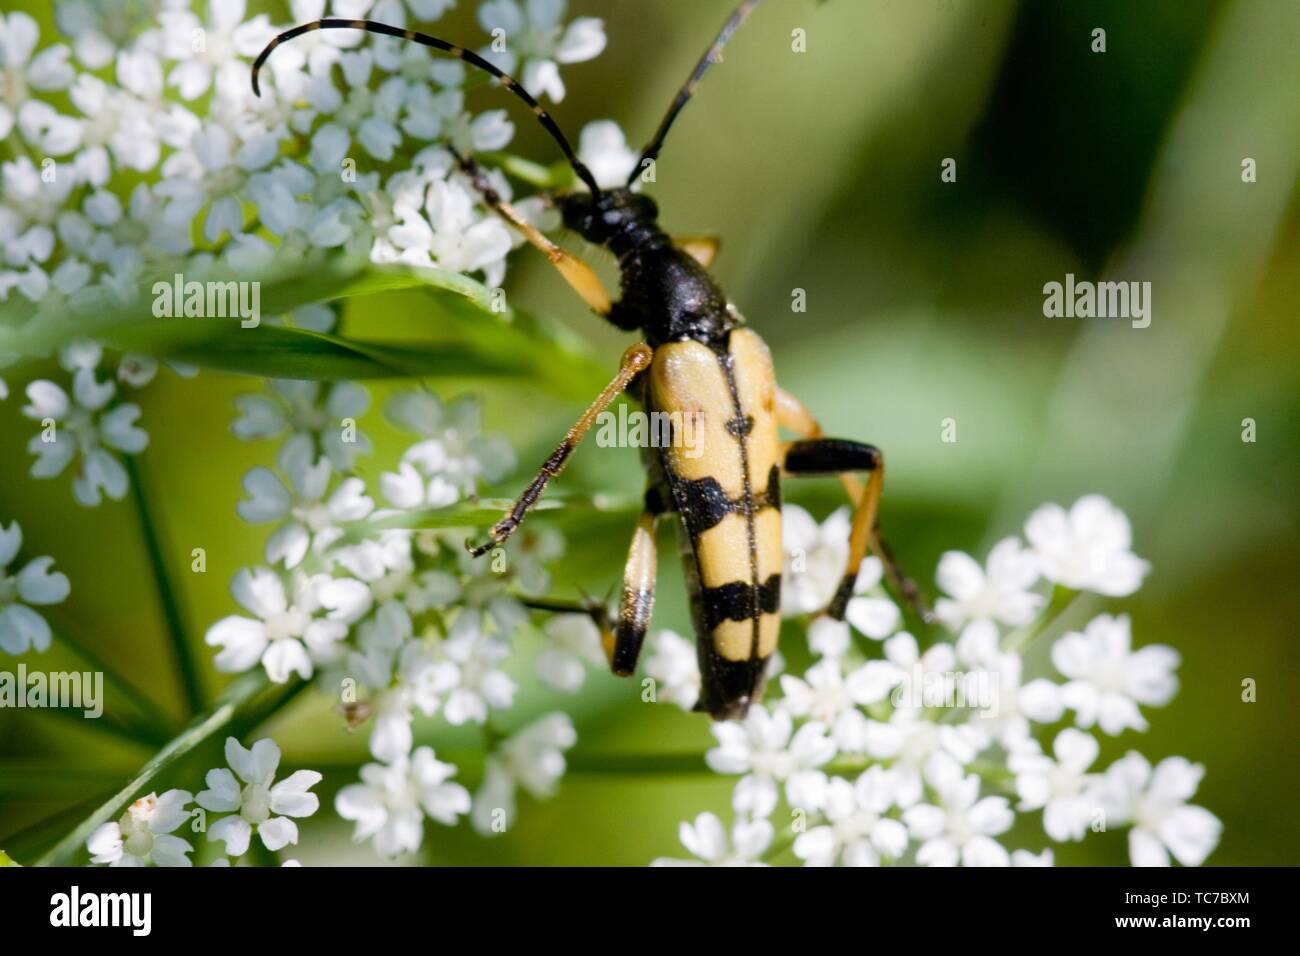 Spotted Longhorn, Leptura maculata. Rutpela maculata, Strangalia maculata. Body size; 18-24mm. Bright yellow and black Longhorn Beetle with yellow Stock Photo